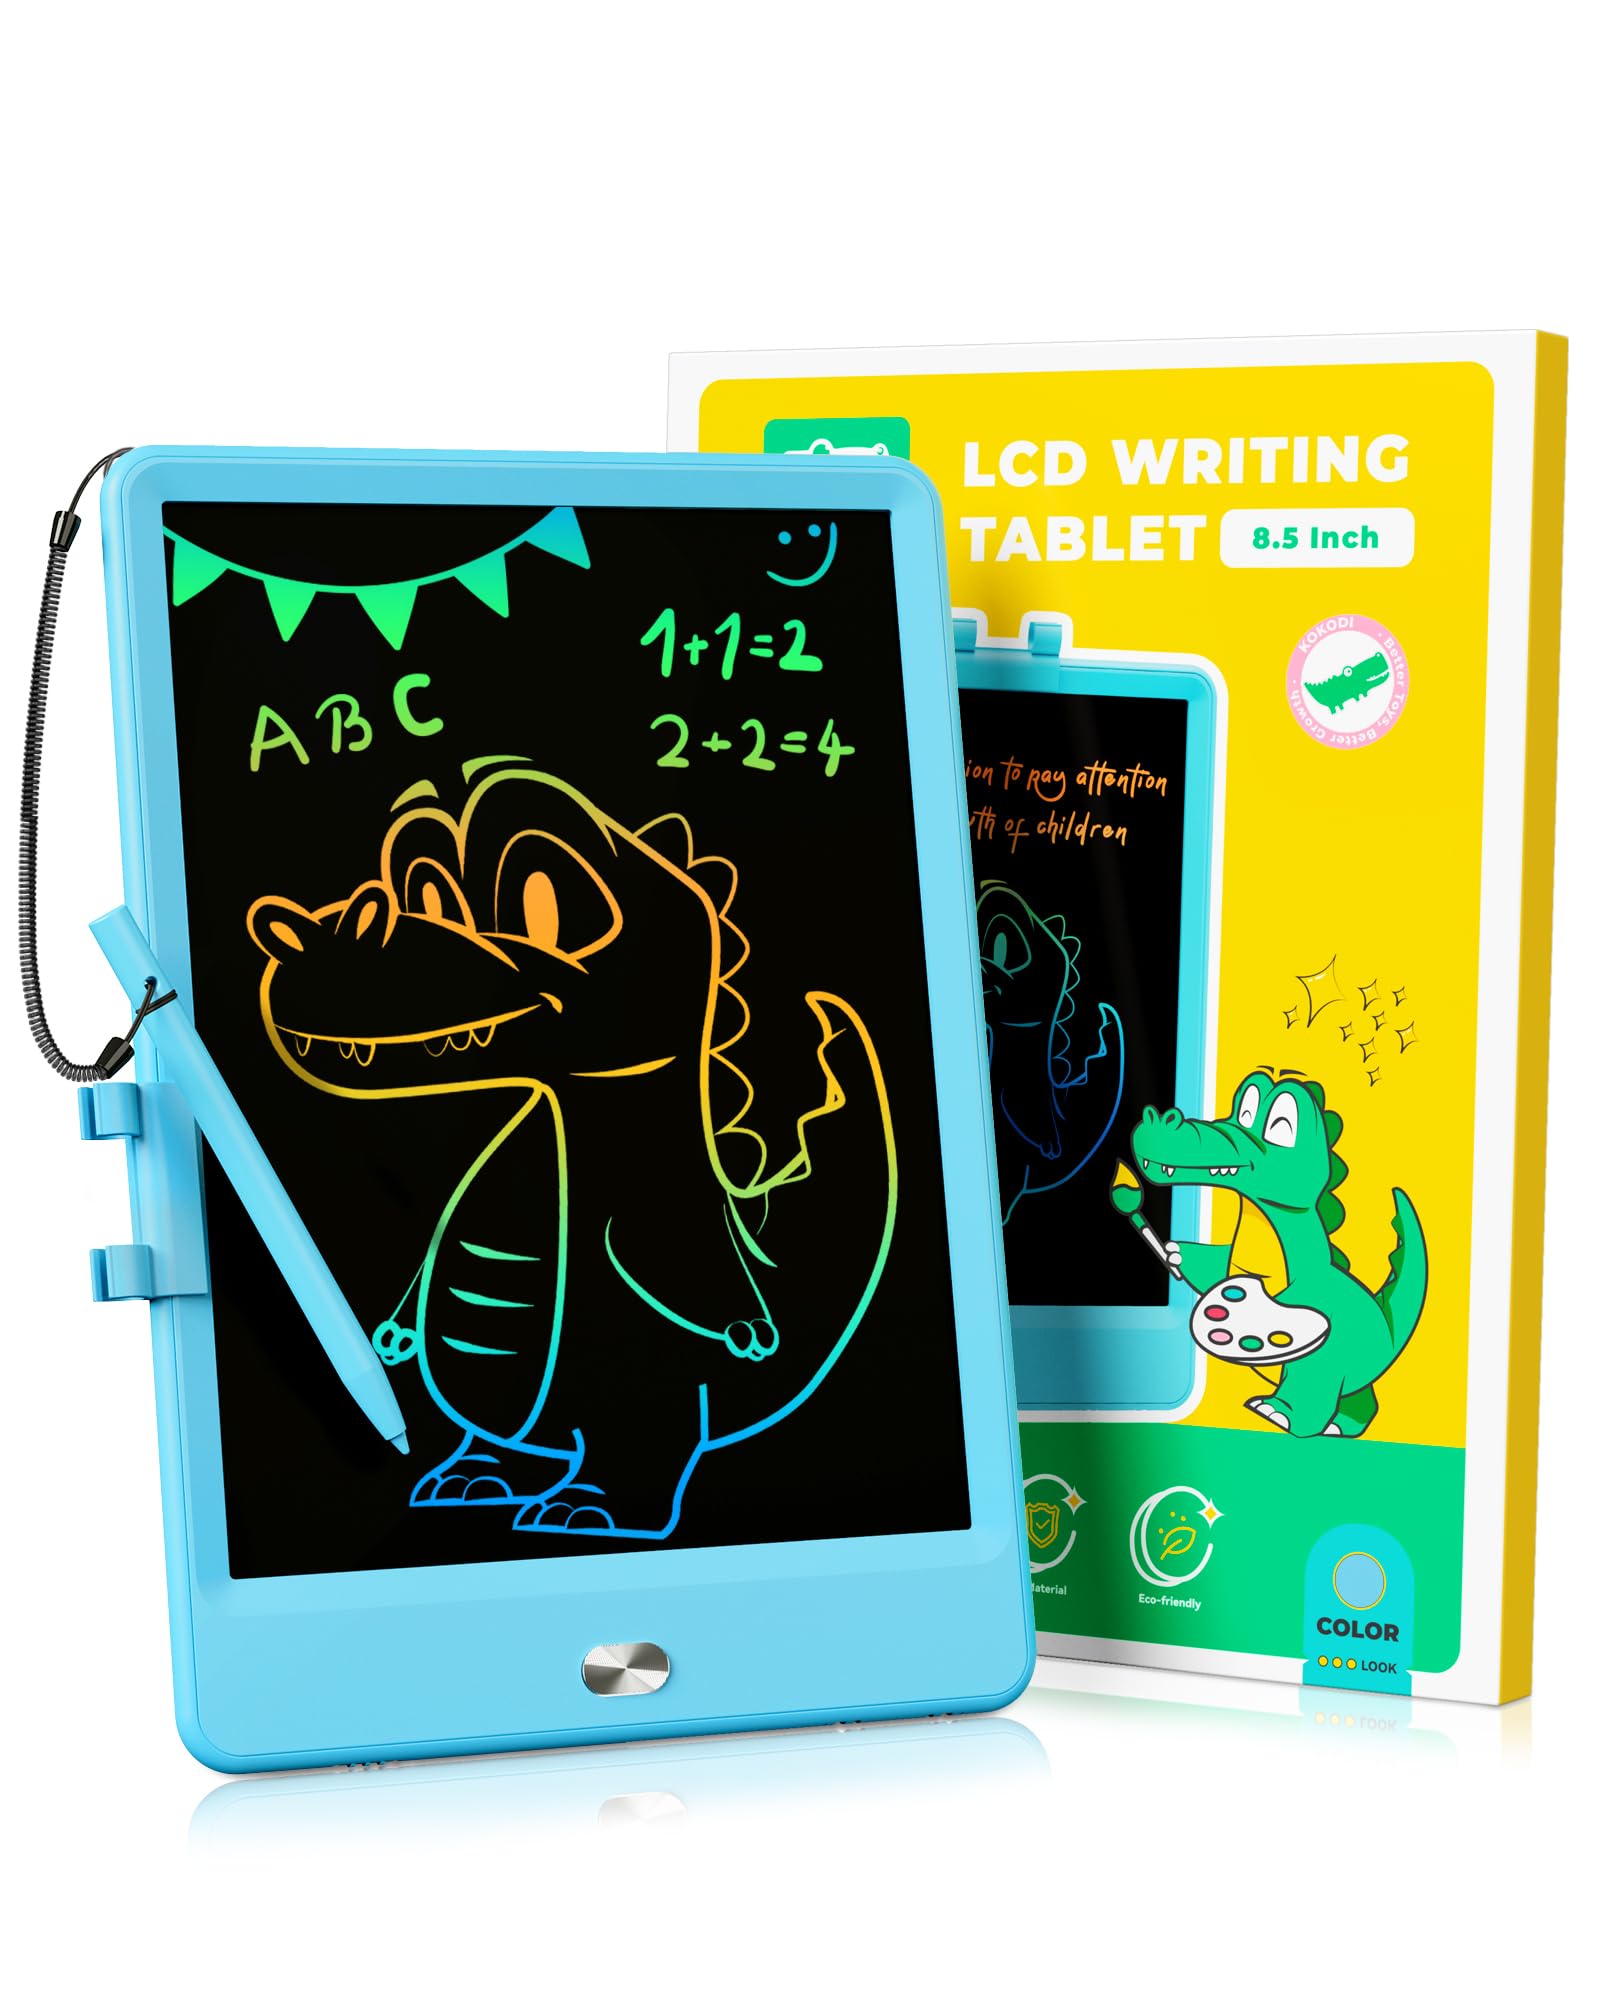 KOKODI LCD Writing Tablet 8.5-Inch Colorful Doodle Board, Electronic Drawing Tablet Drawing Pad for Kids, Educational and Learning Kids Toys Gifts for 2 3 4 5 6 7 Year Old Boys and Girls(Blue)